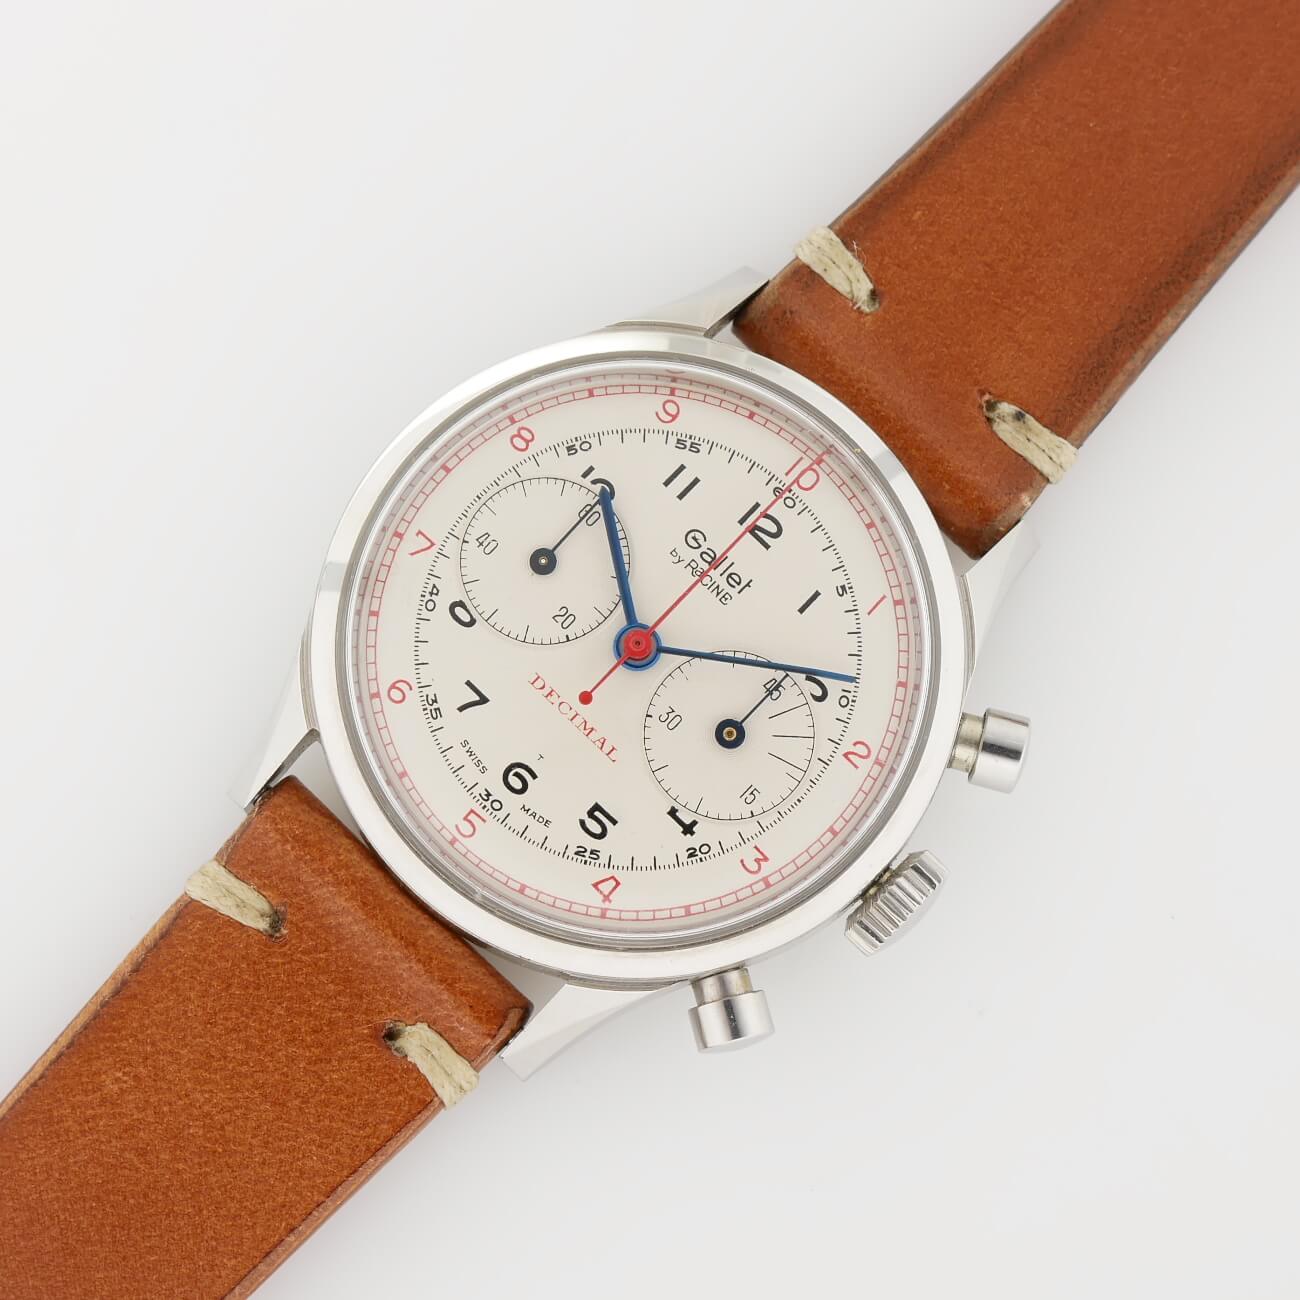 GALLET by RACINE MULTICHRON CHRONOGRAPH